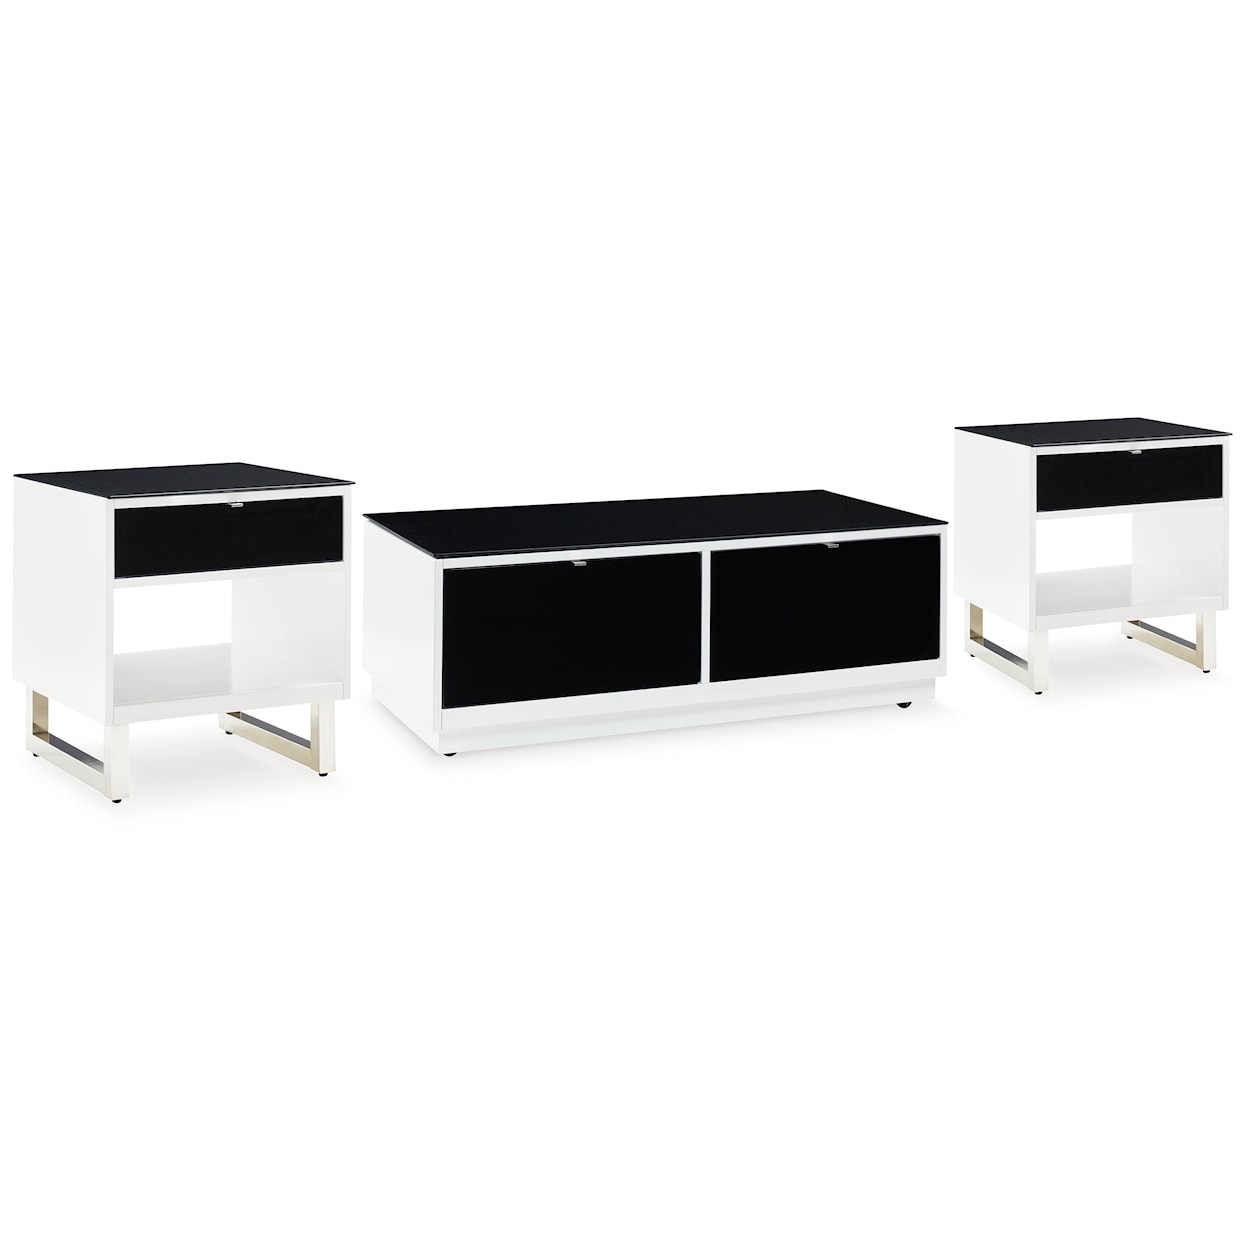 Signature Gardoni Coffee Table and 2 End Tables